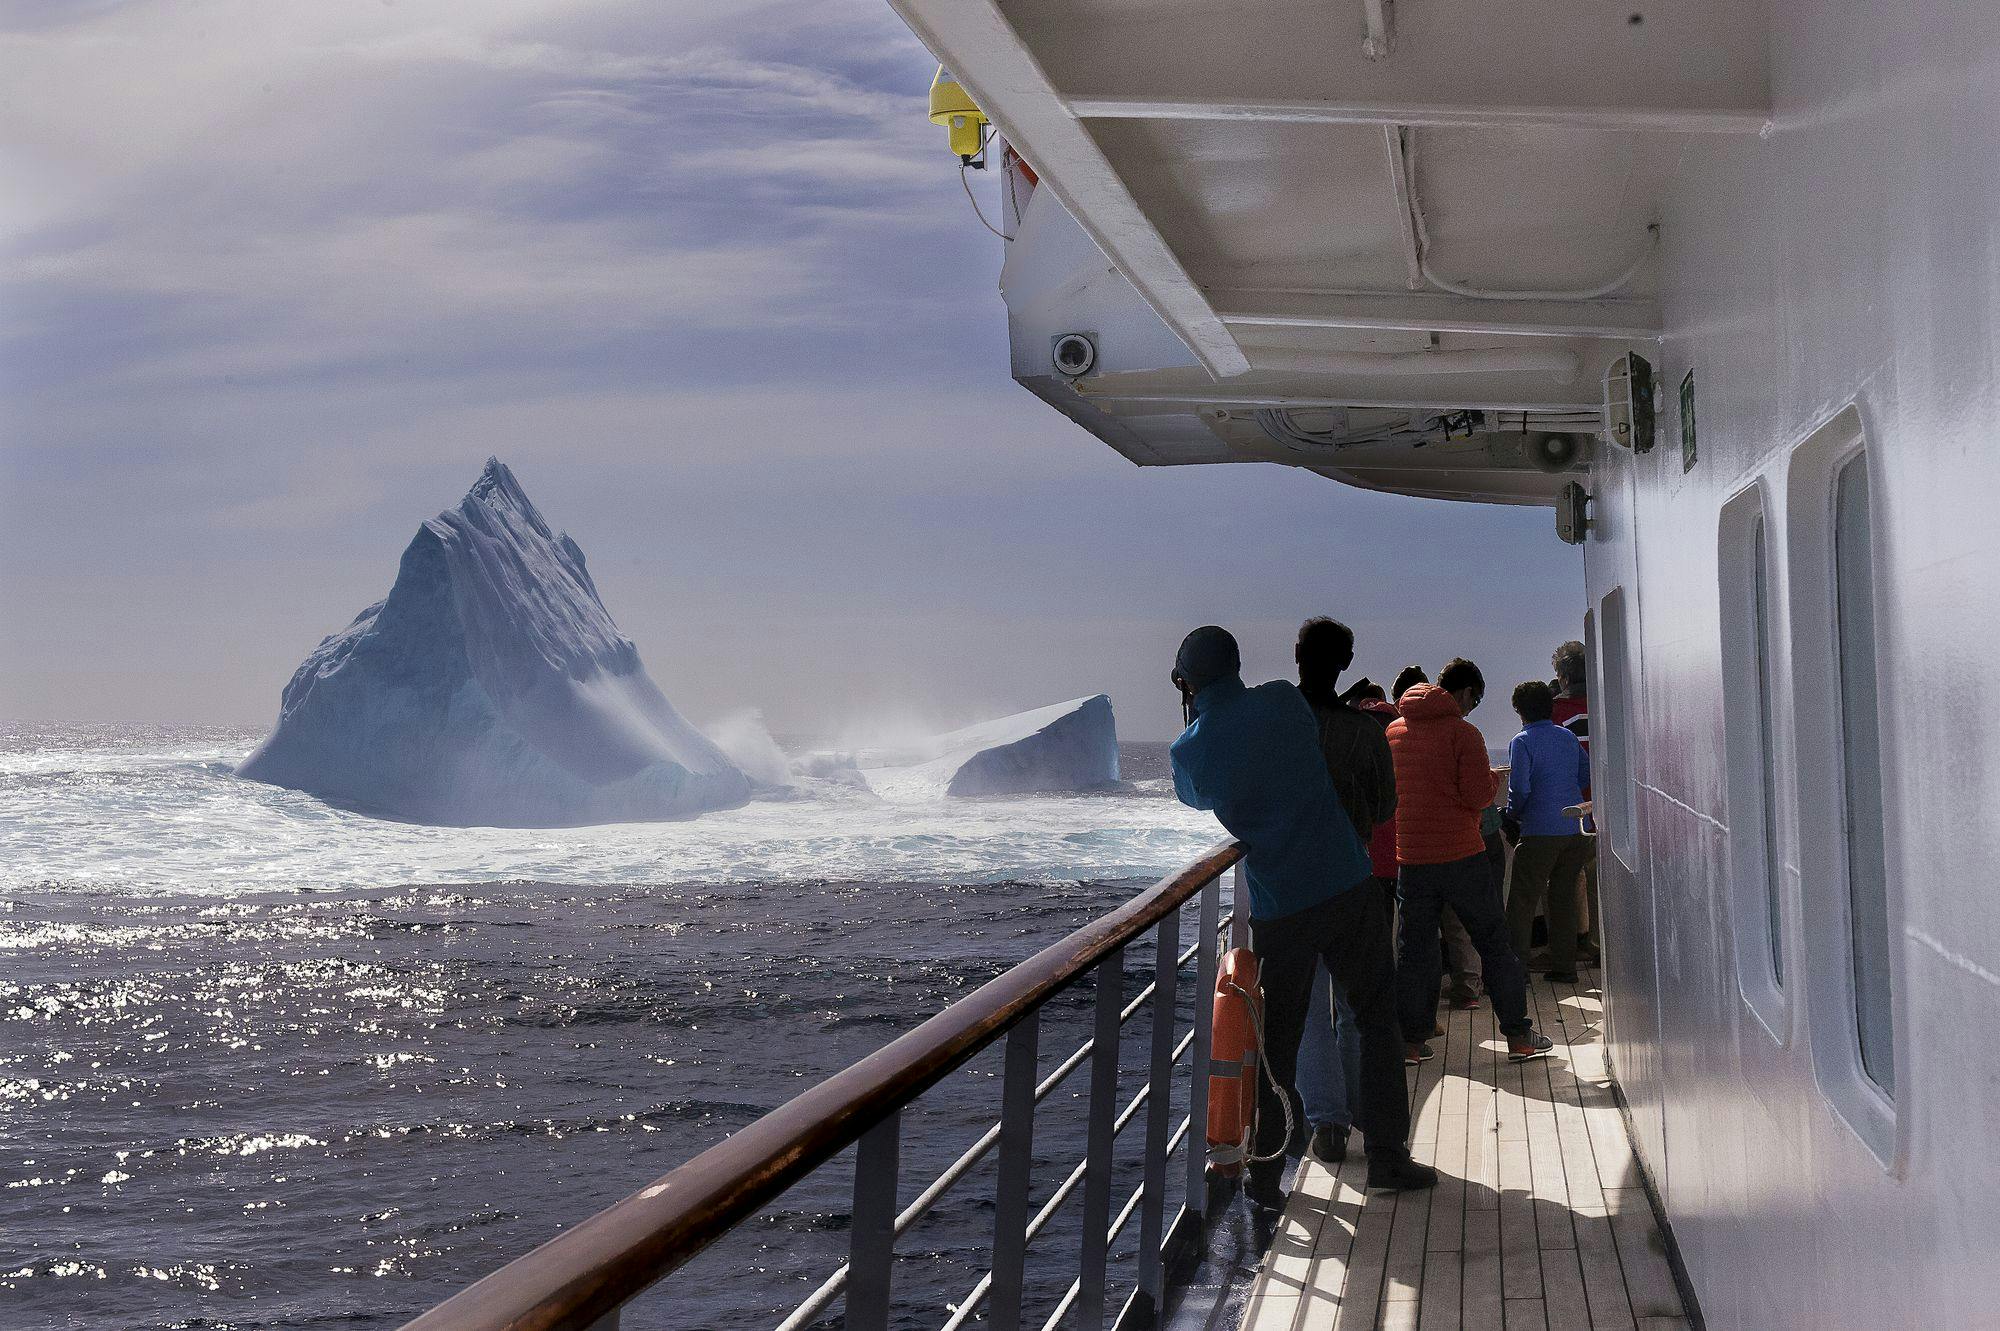 Antarctica Expedition - A Journey With A Purpose